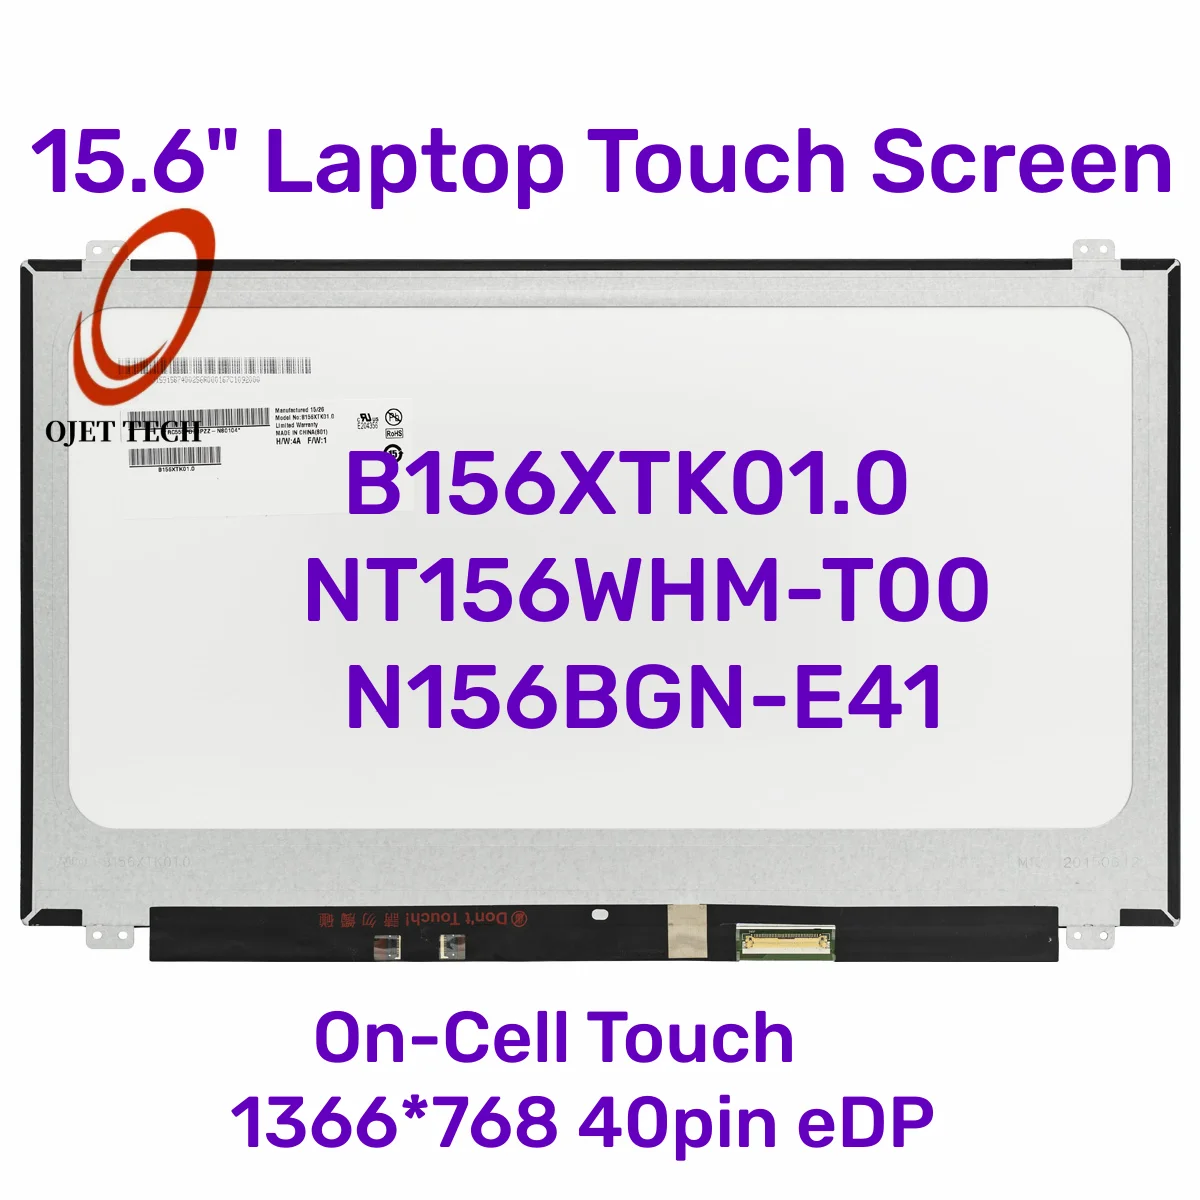 

15.6" Laptop Touch Screen B156XTK01.0 Fit NT156WHM-T00 N156BGN-E41 LTN156AT40-H01 HD1366x768 On-Cell Touch LCD Panel 40pin eDP